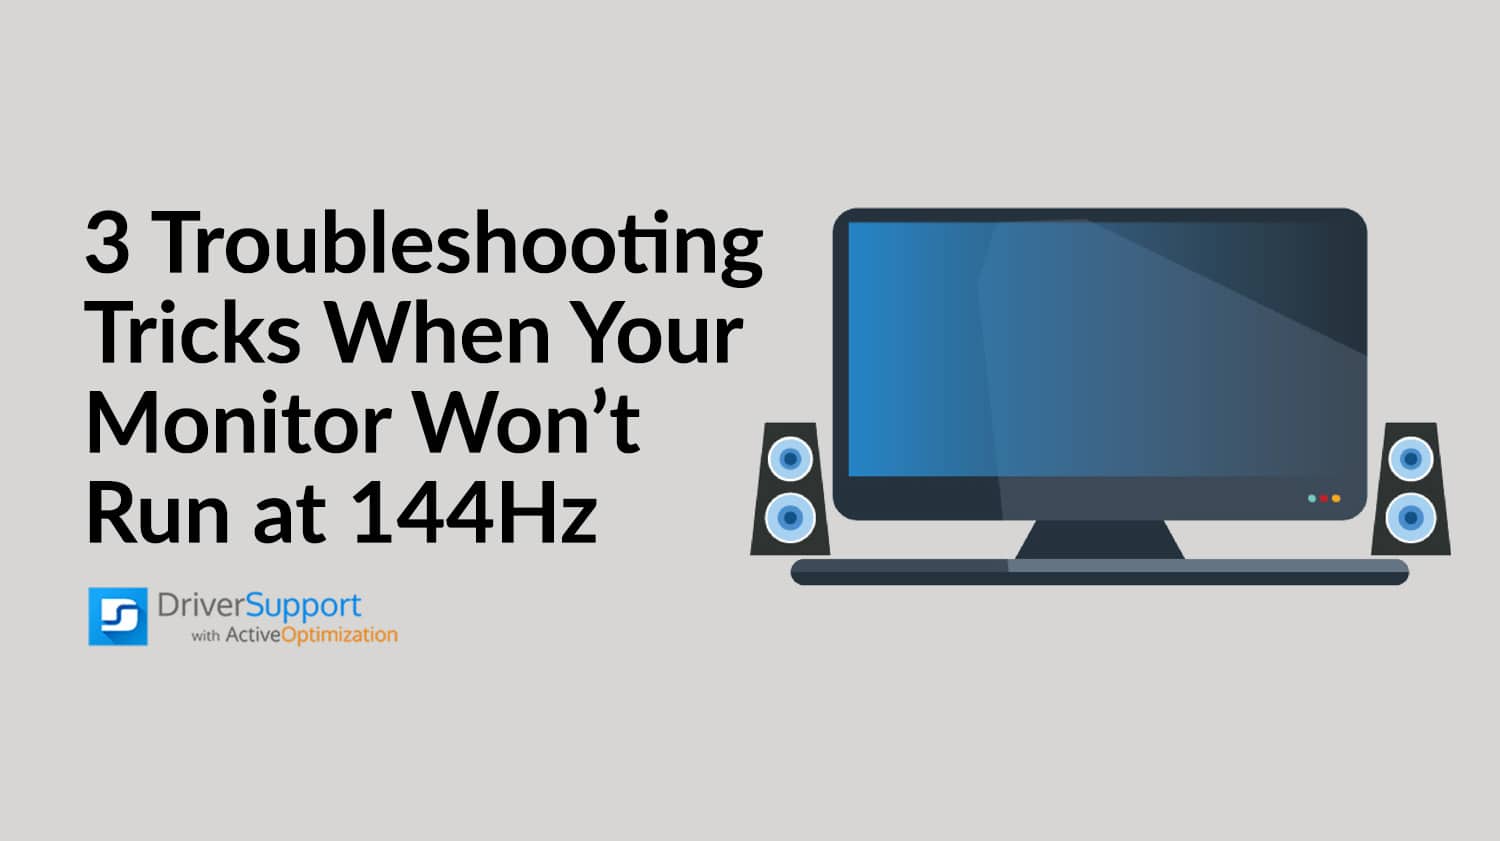 3 Troubleshooting Tricks When Your Monitor Won't Run at 144Hz